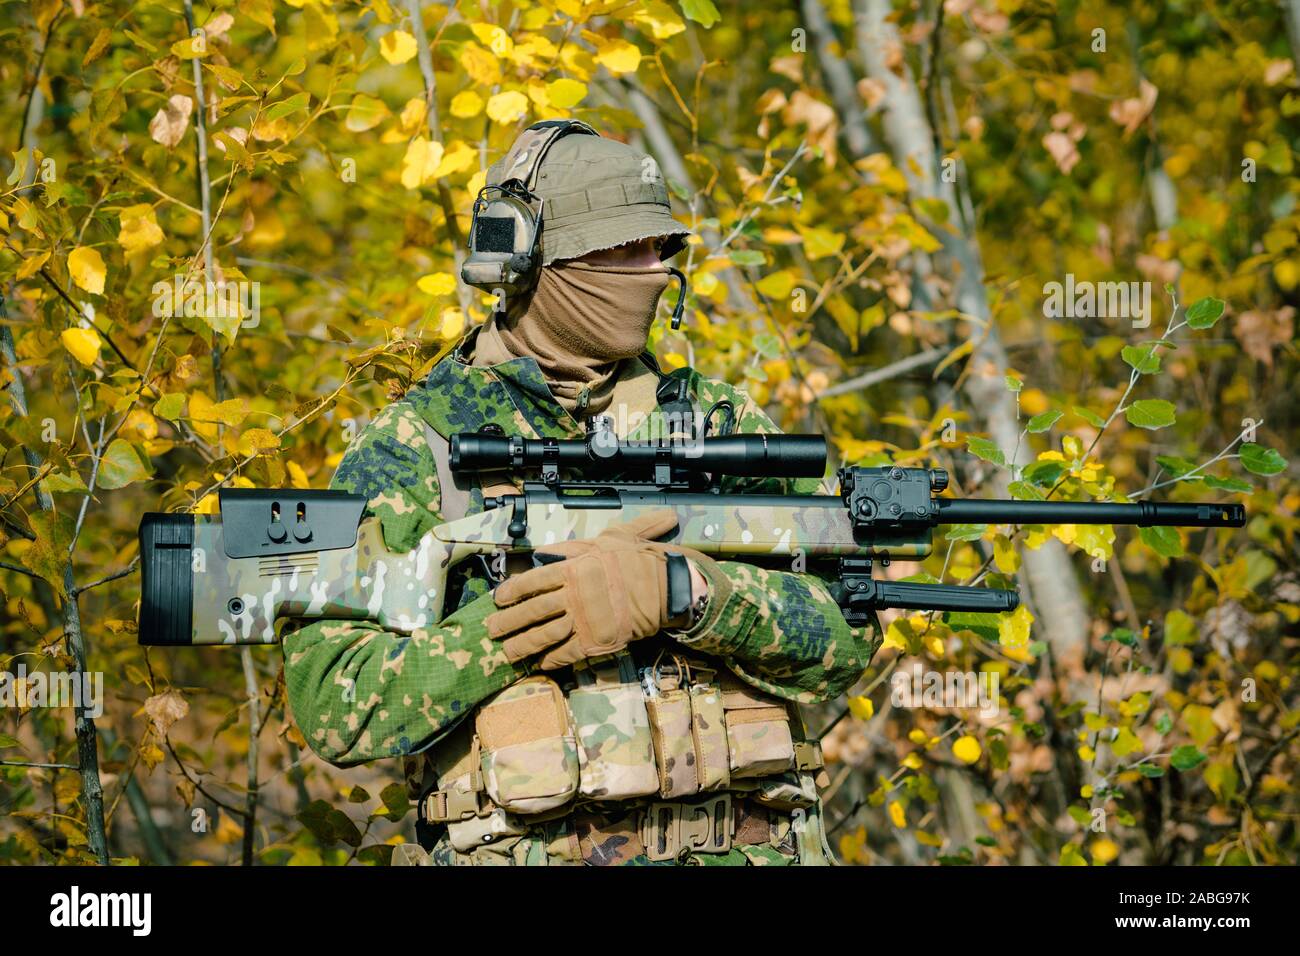 https://c8.alamy.com/comp/2ABG97K/airsoft-man-in-uniform-hold-sniper-rifle-on-yellow-forest-backdrop-side-view-2ABG97K.jpg